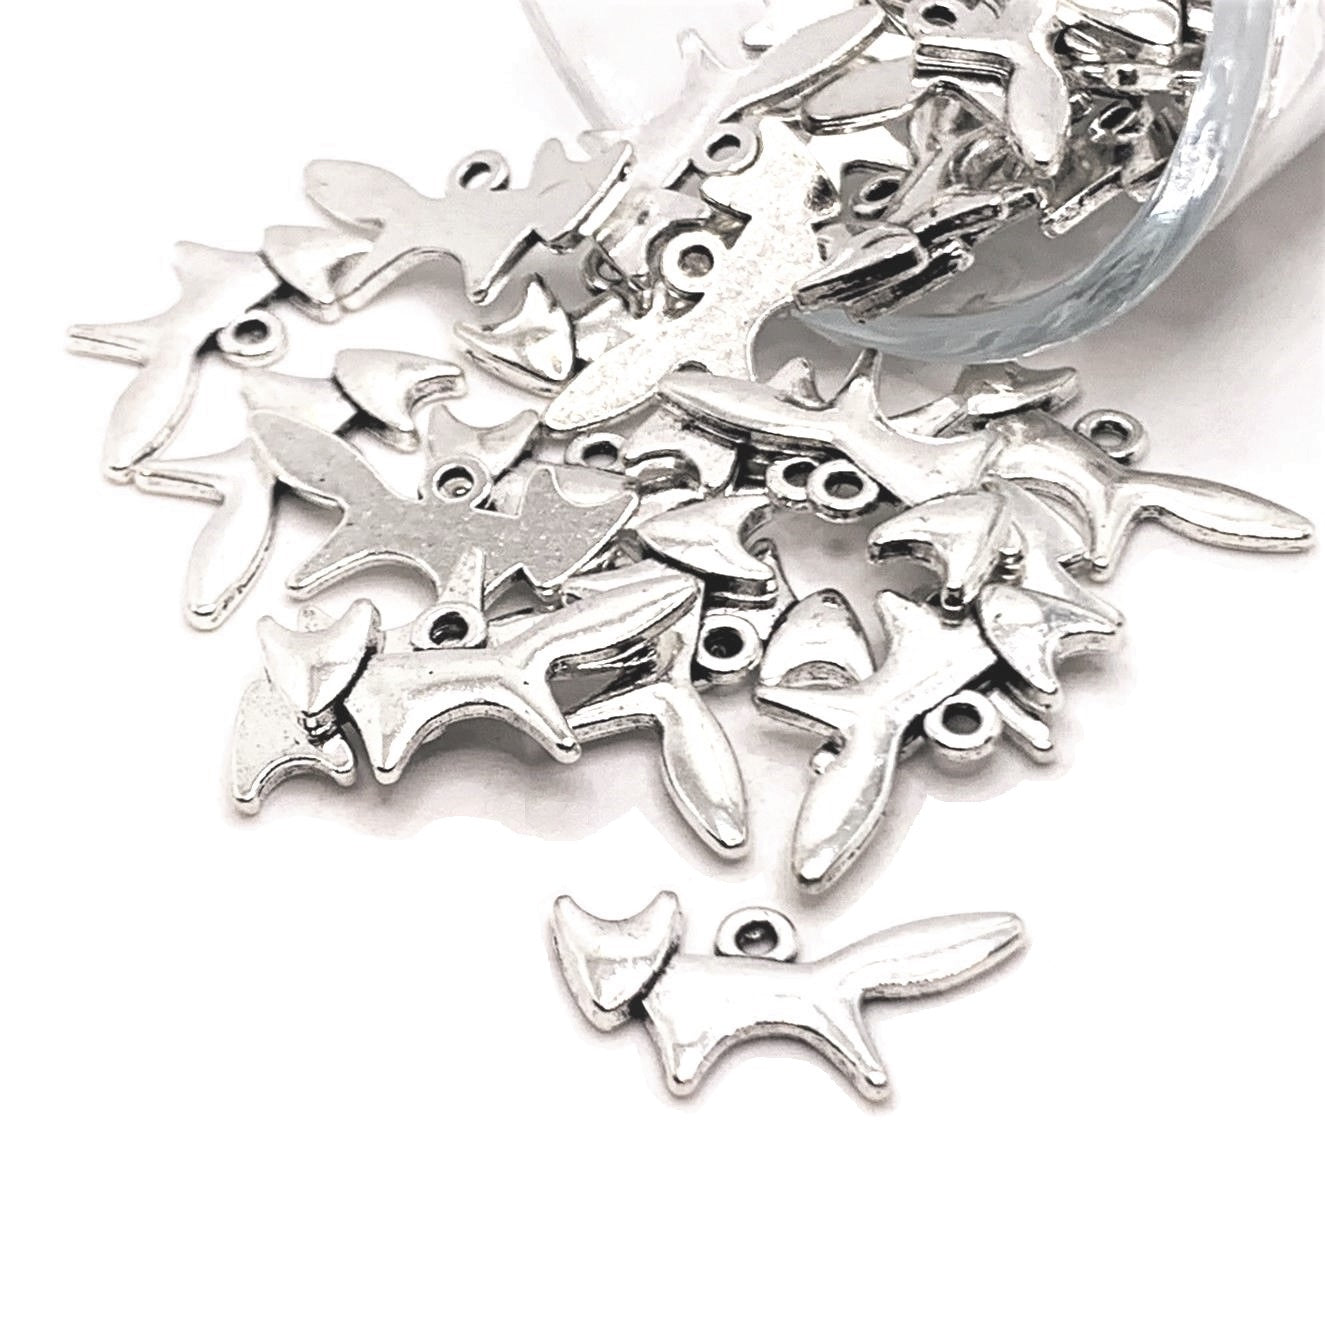 4, 20 or 50 Pieces: Small Silver Fox Charms